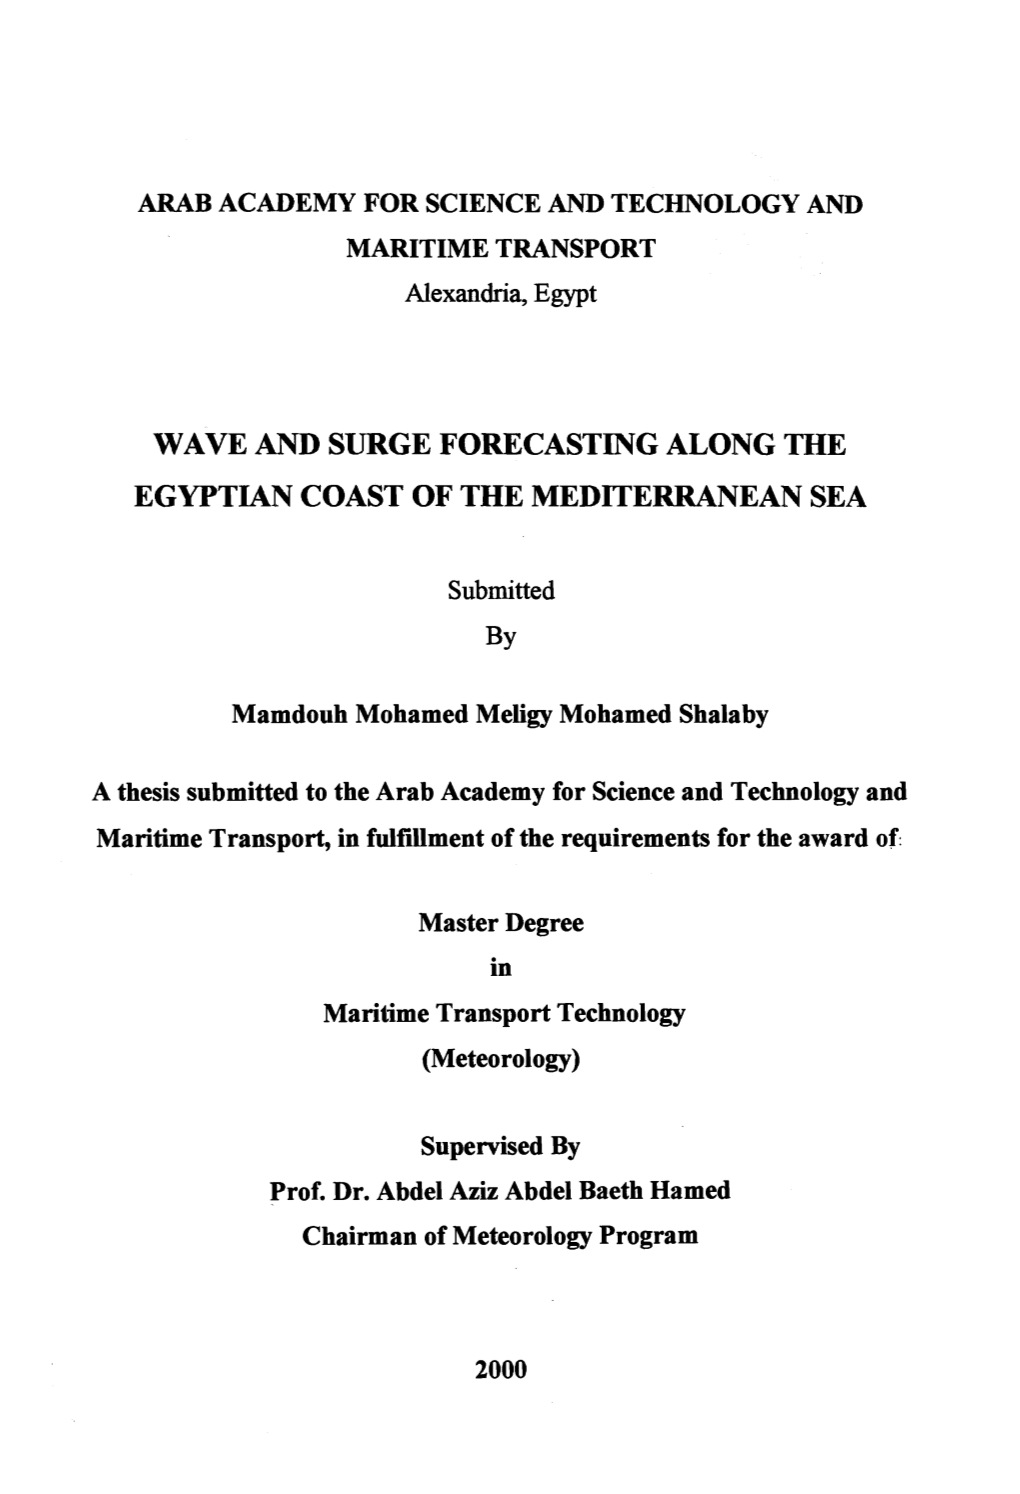 Wave and Surge Forecasting Along the Egyptian Coast of the Mediterranean Sea